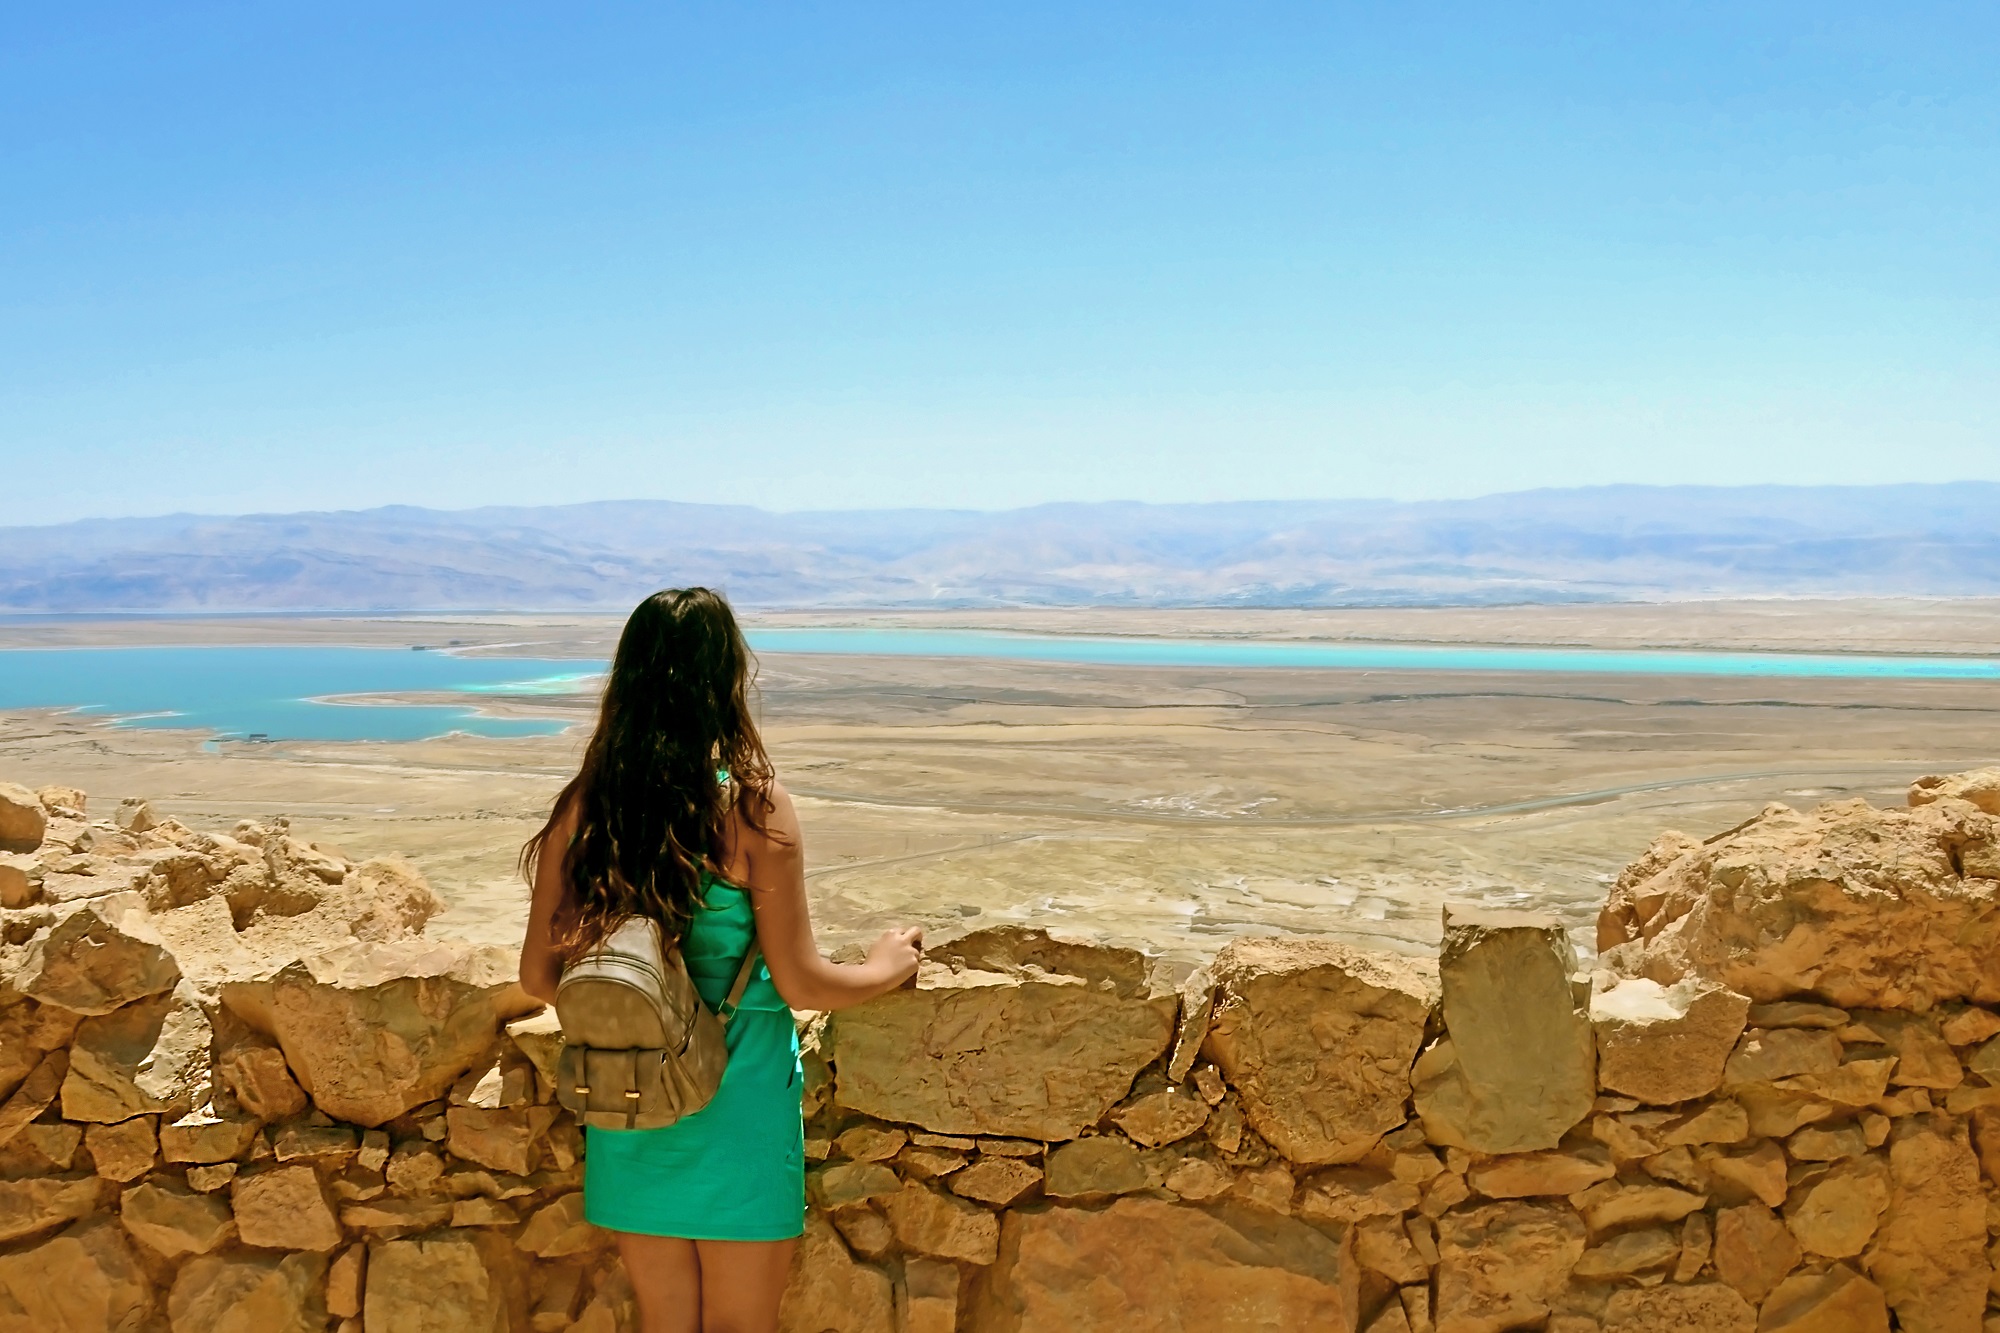 A tourist in Masada looking at the Dead Sea, Israel